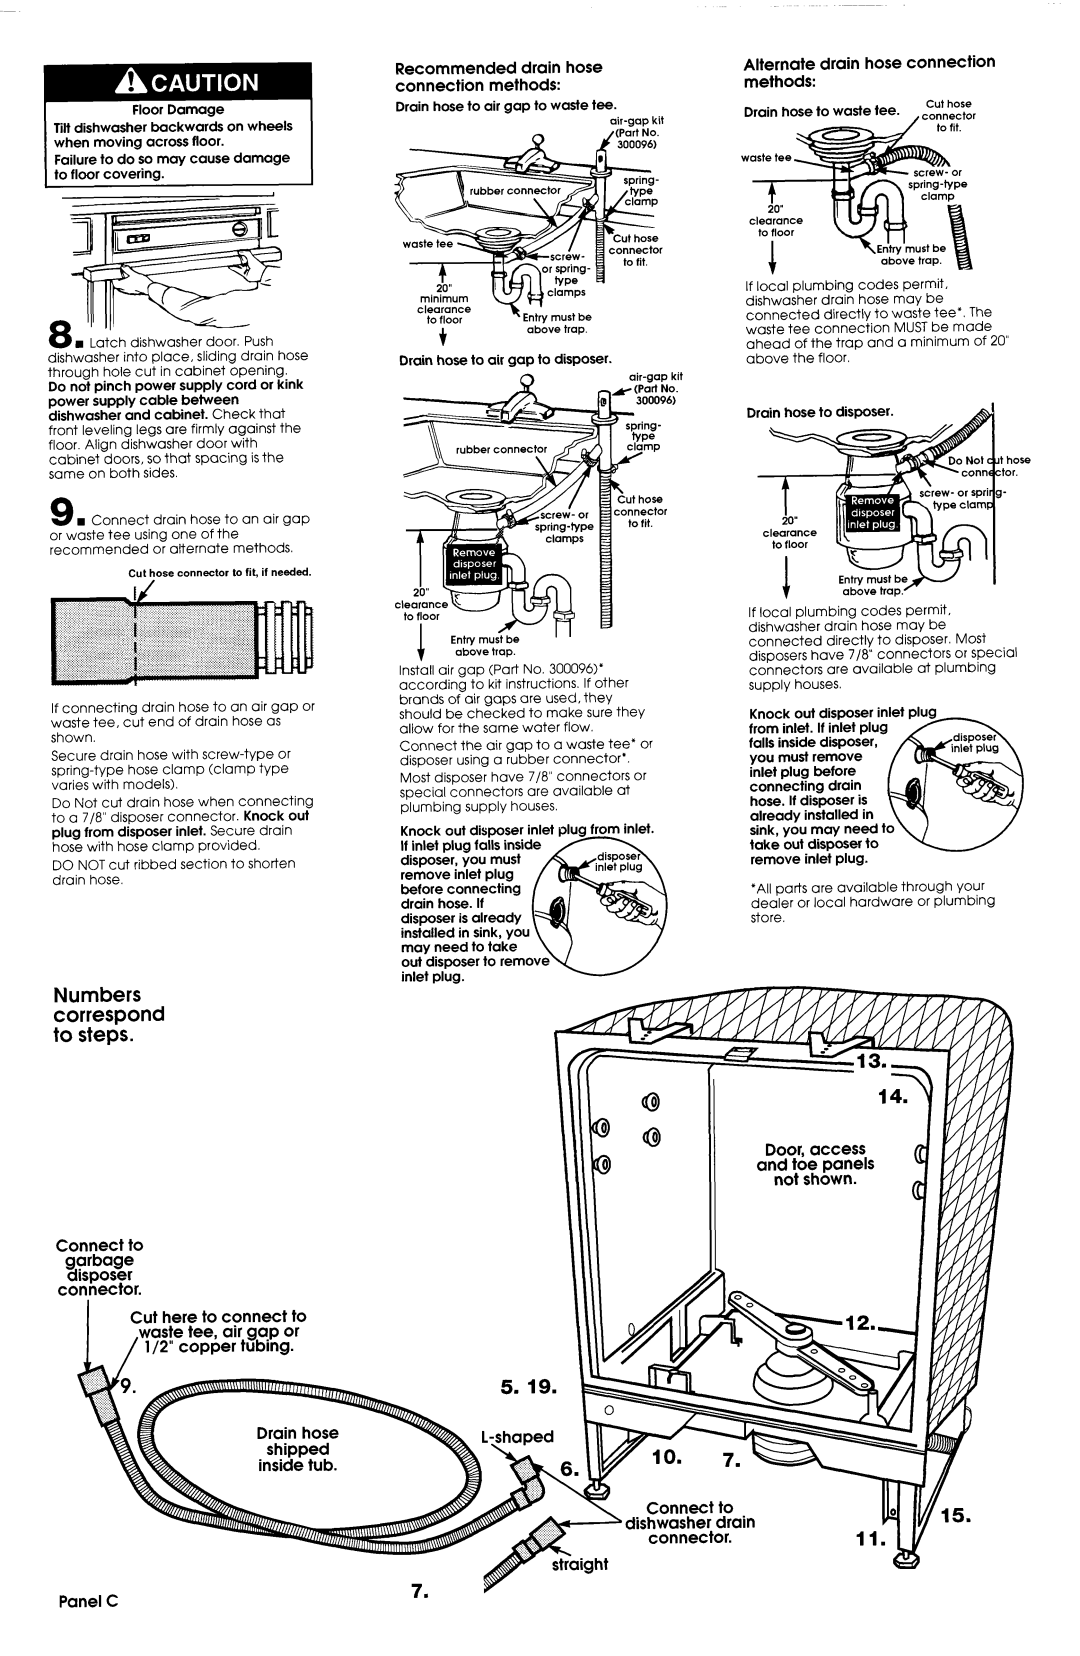 Whirlpool 3374369 1 yJp+l, Recommended drain hose connection methods, Alternate drain hose connection methods, Panel C 